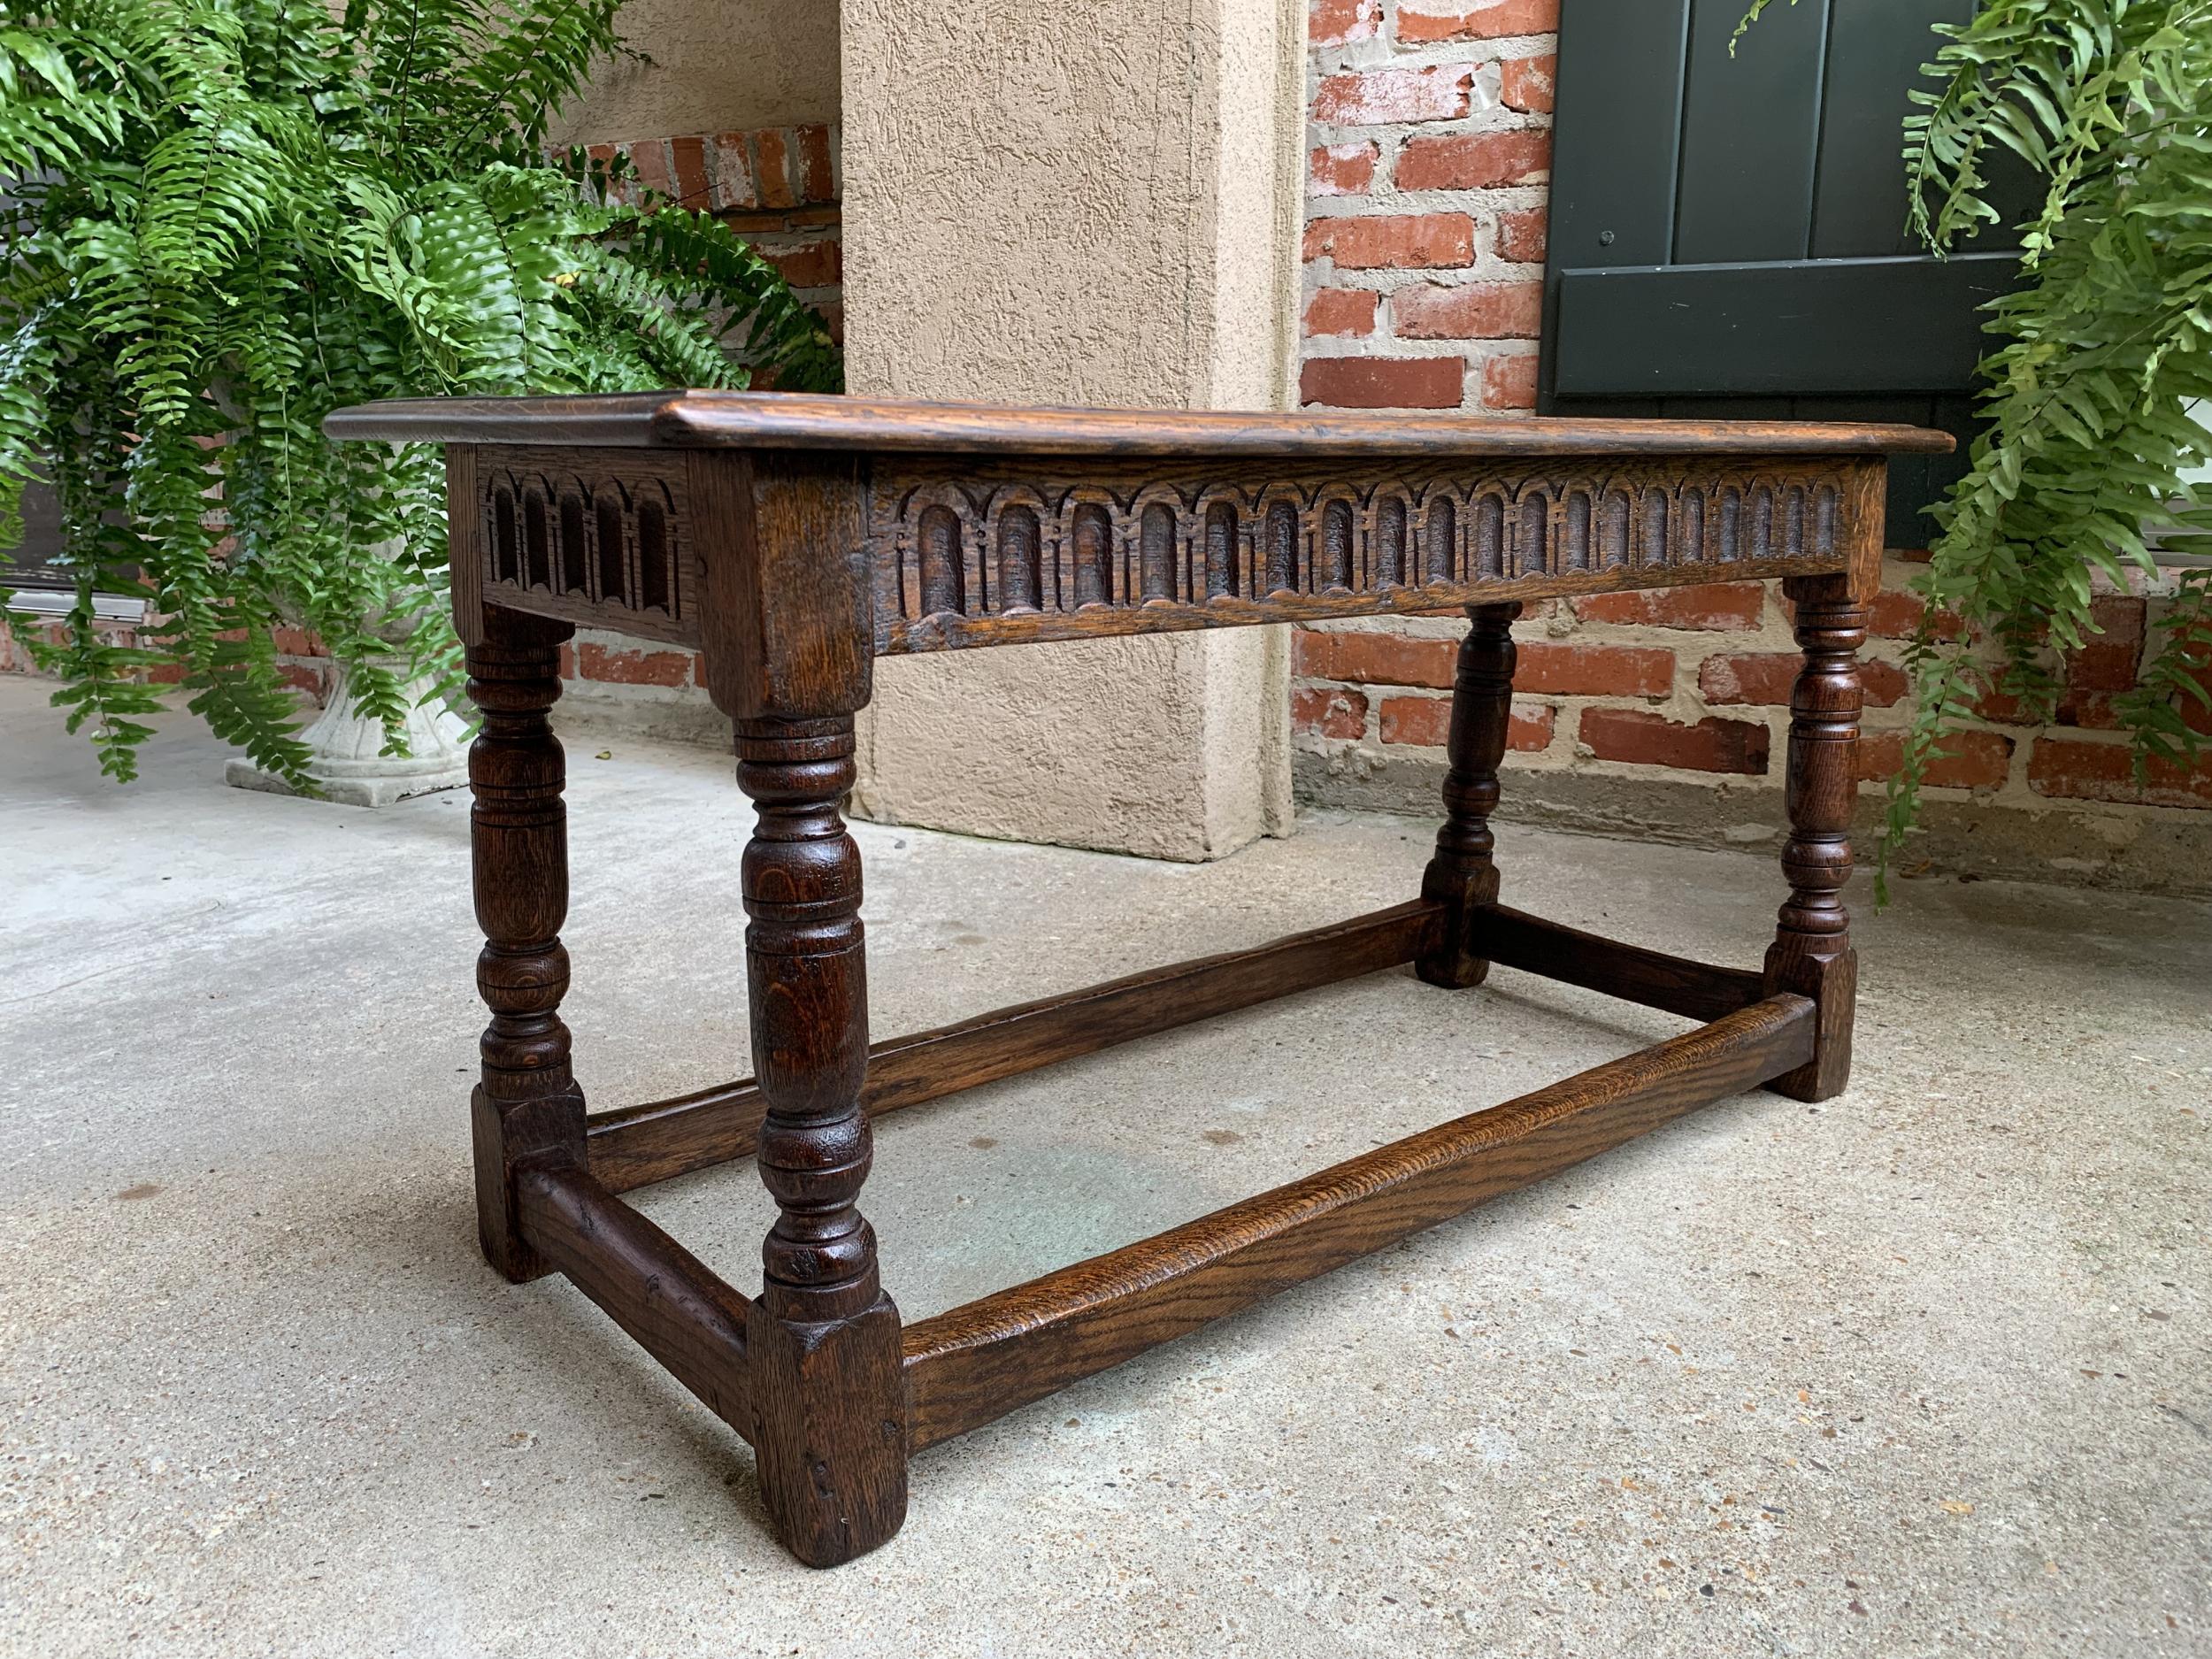 Antique English carved oak pegged joint stool duet bench window seat c1900

~Direct from England~
~Long and lovely antique English oak “duet” bench or stool, a generous 3 ft. length!~
~Heavy, solid oak top, with beveled edge above the apron with